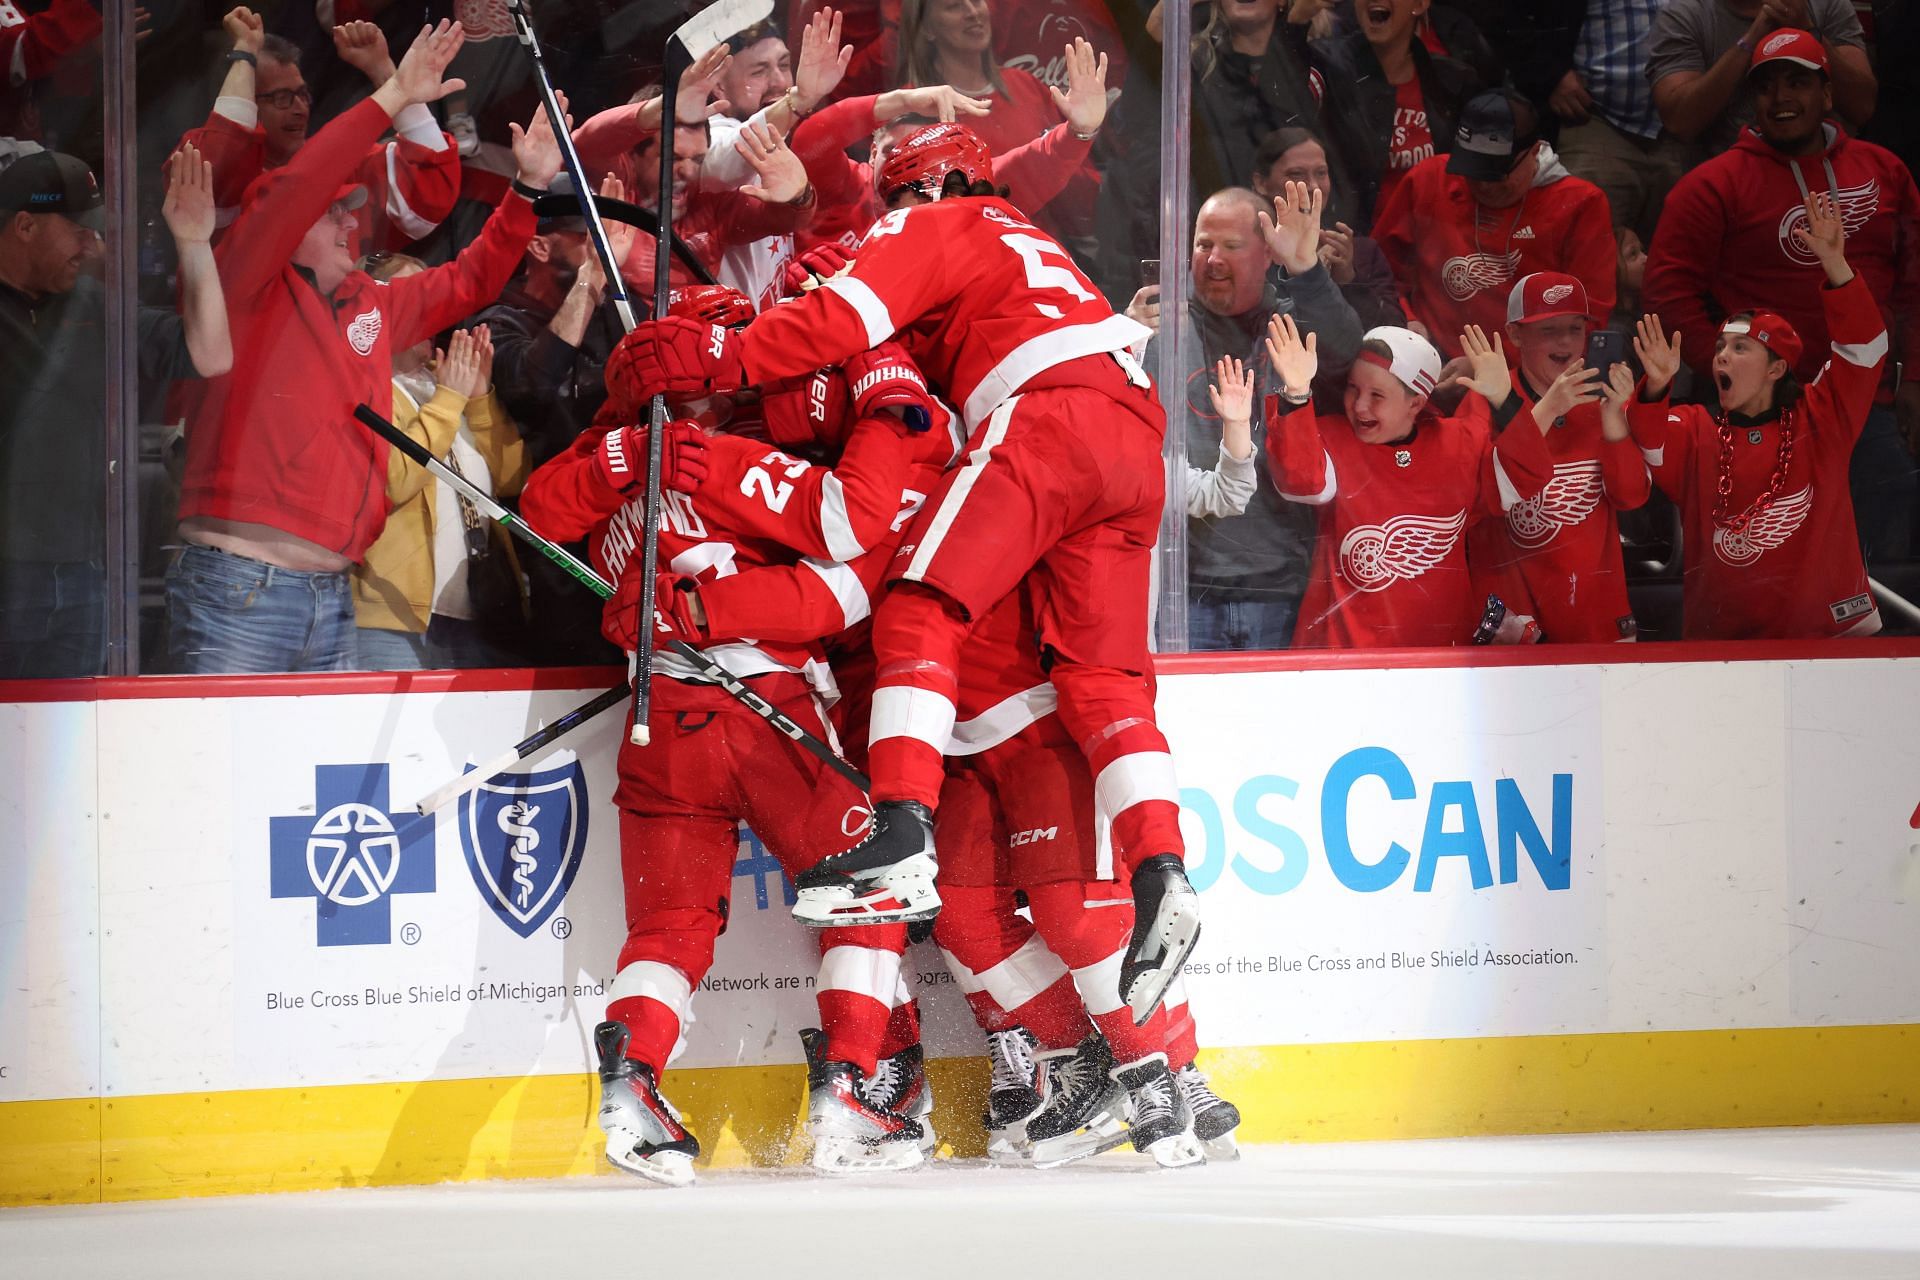 The Detroit Red Wings celebrate an overtime goal.